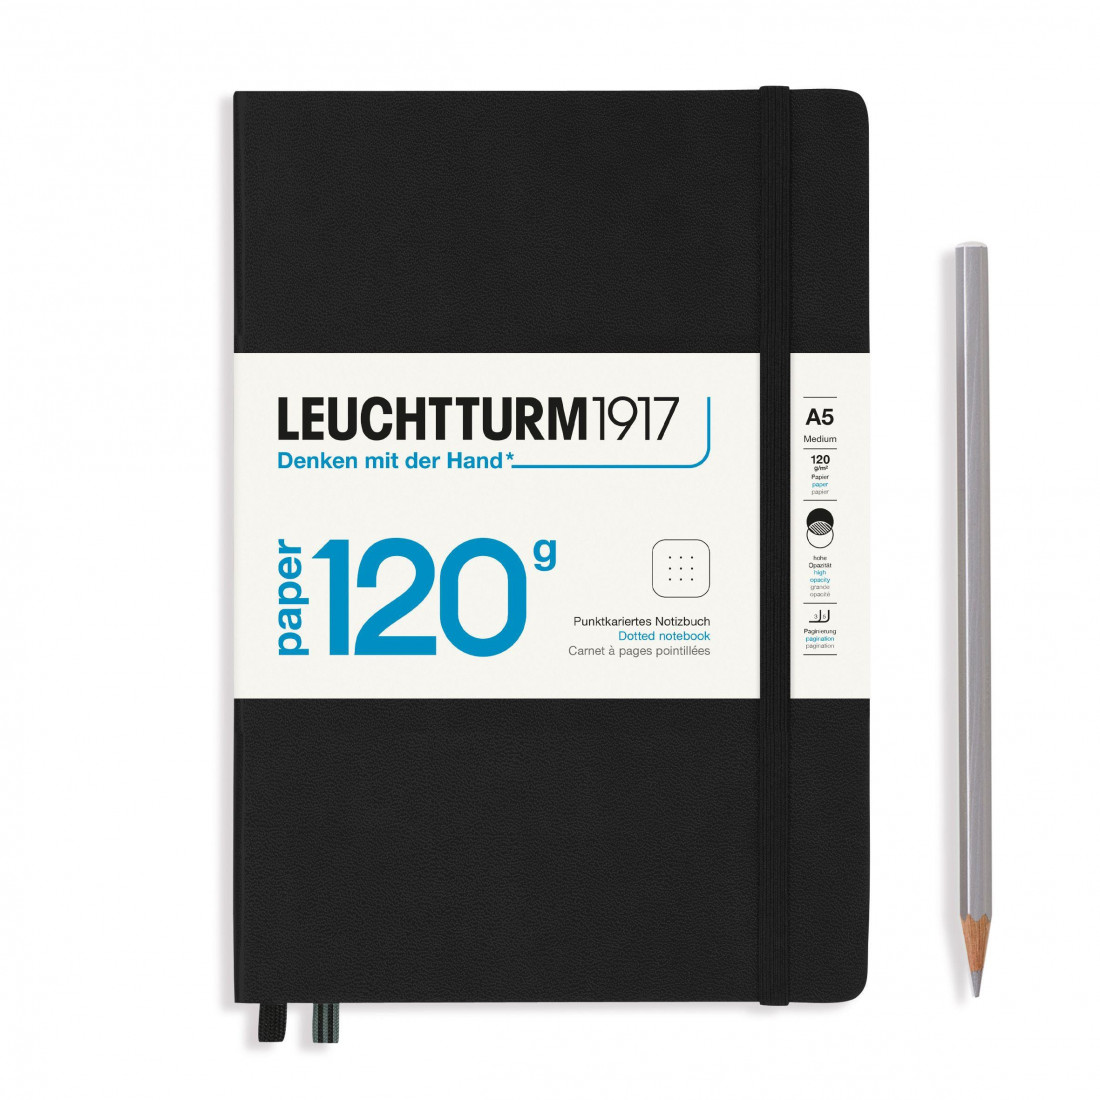 Leuchtturm 1917 Notebook A5 Edition 120g Black Dotted Hard Cover